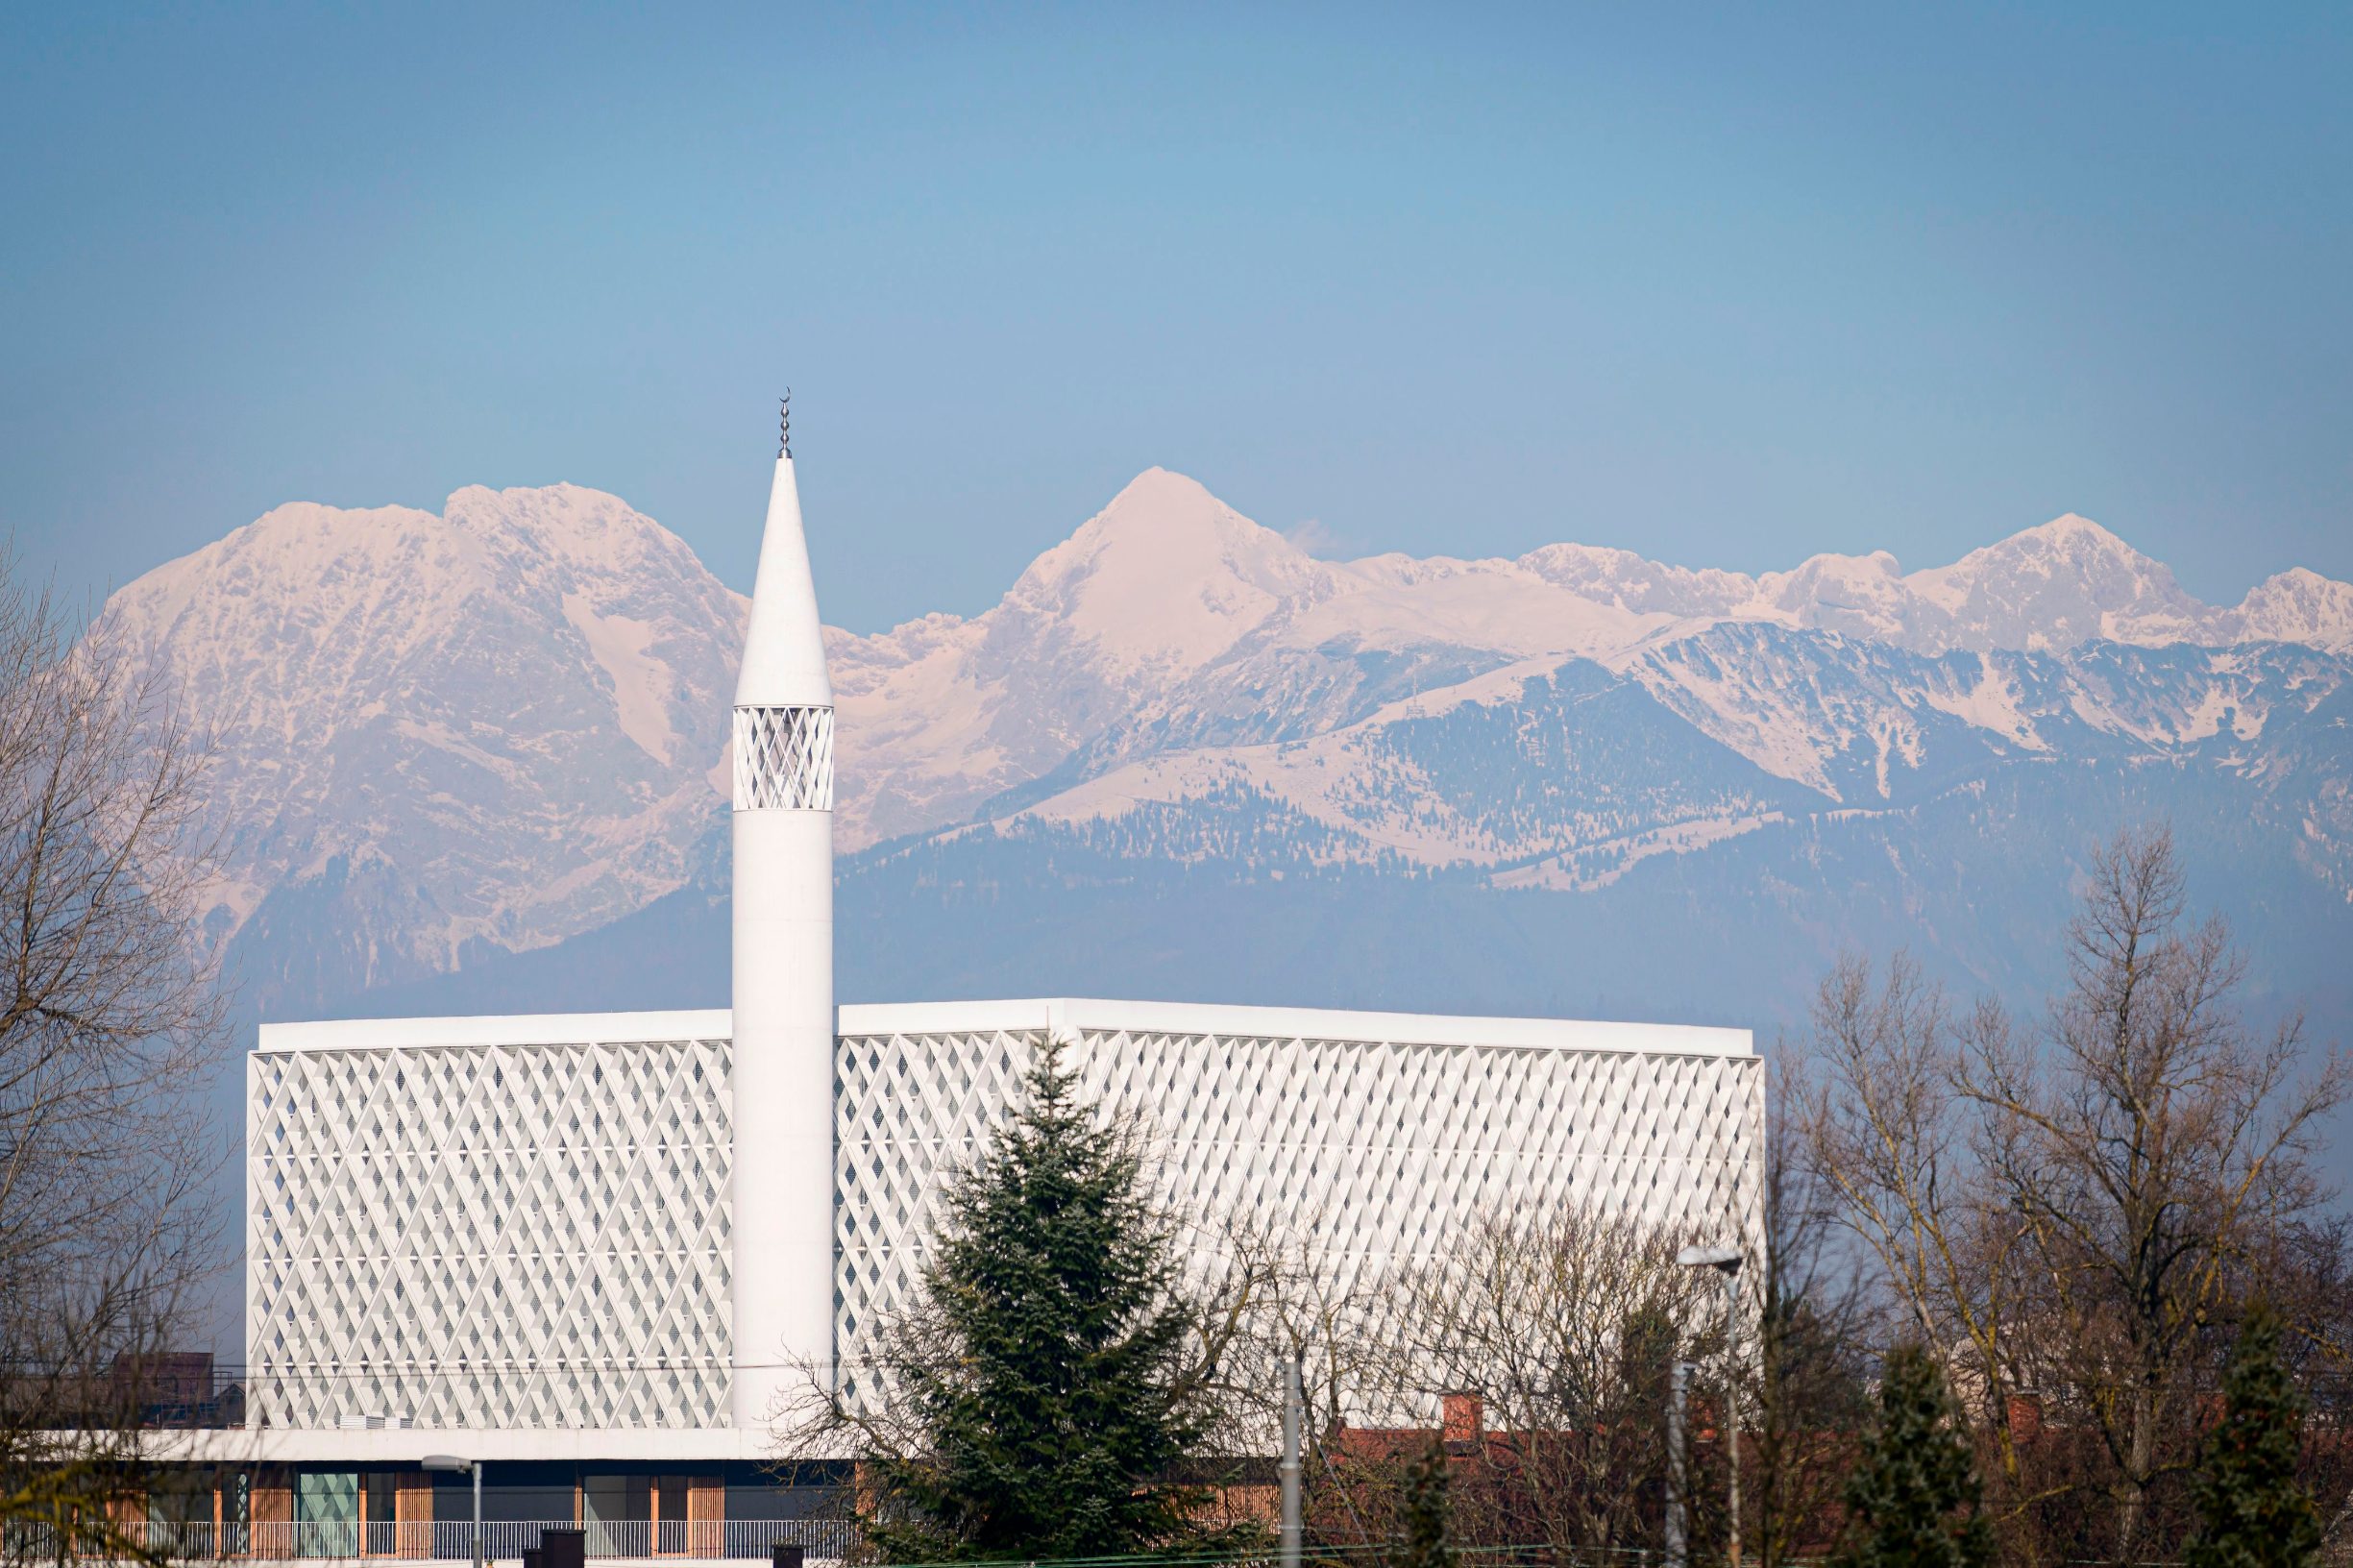 A taken on on January 29, 2020, shows Slovenia's first mosque in Ljubljana. - Slovenia's first mosque opened its doors in the capital Ljubljana on February 3, more than 50 years after the initial request to build it was made. Muslims in the predominantly Catholic Alpine country first filed a request to build a mosque in the late 1960s while Slovenia was still part of the former Communist Yugoslavia. The community received permission 15 years ago, but ran into opposition from right-wing politicians and groups, as well as financial troubles. (Photo by Jure Makovec / AFP)